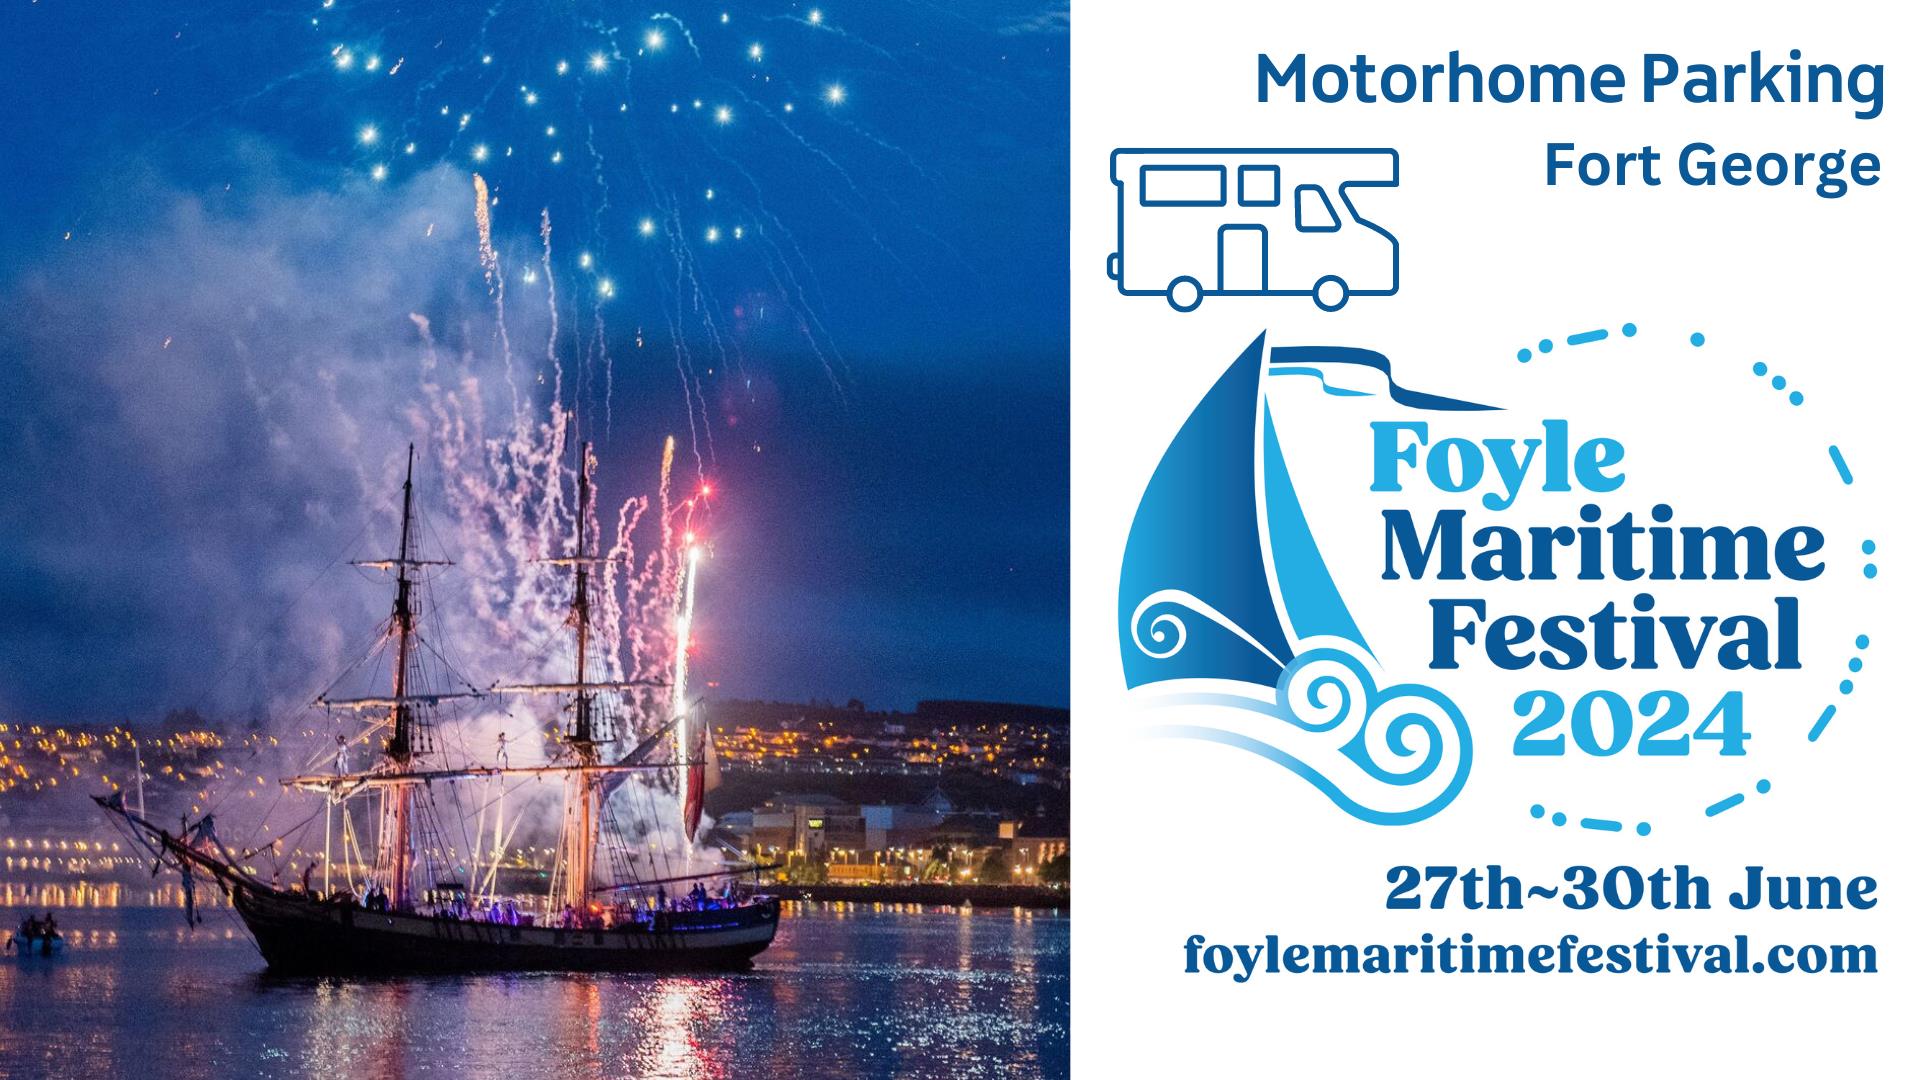 Motorhome Parking at Fort George during the Foyle Maritime Festival